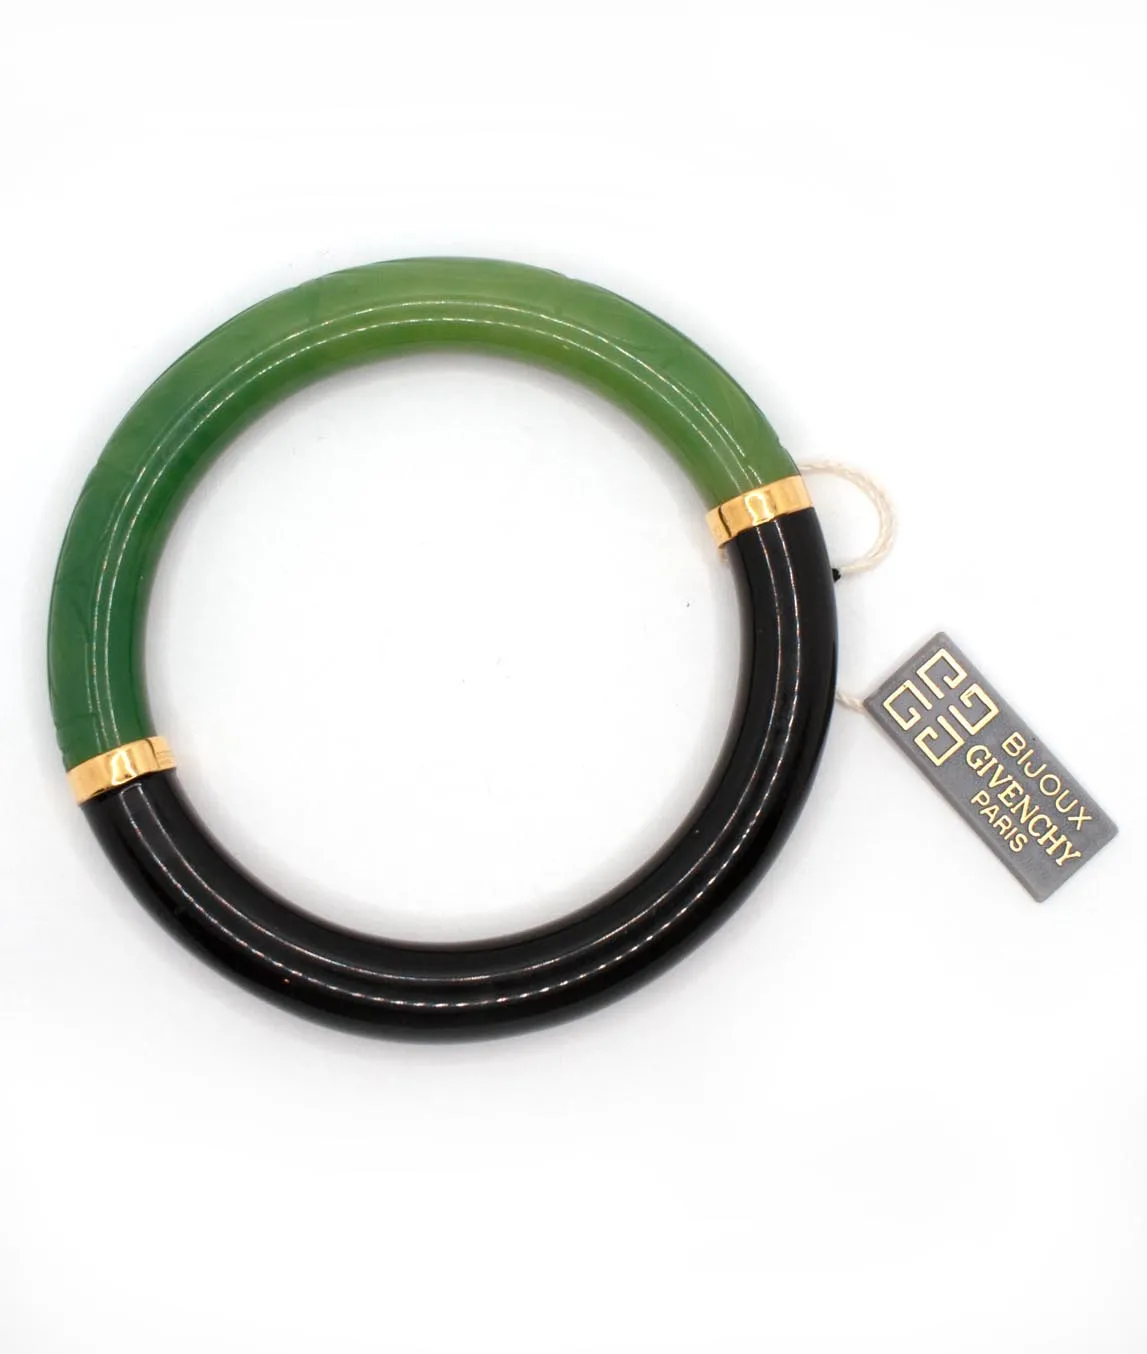 Givenchy green and black bangle with gold joins and Givenchy store tag